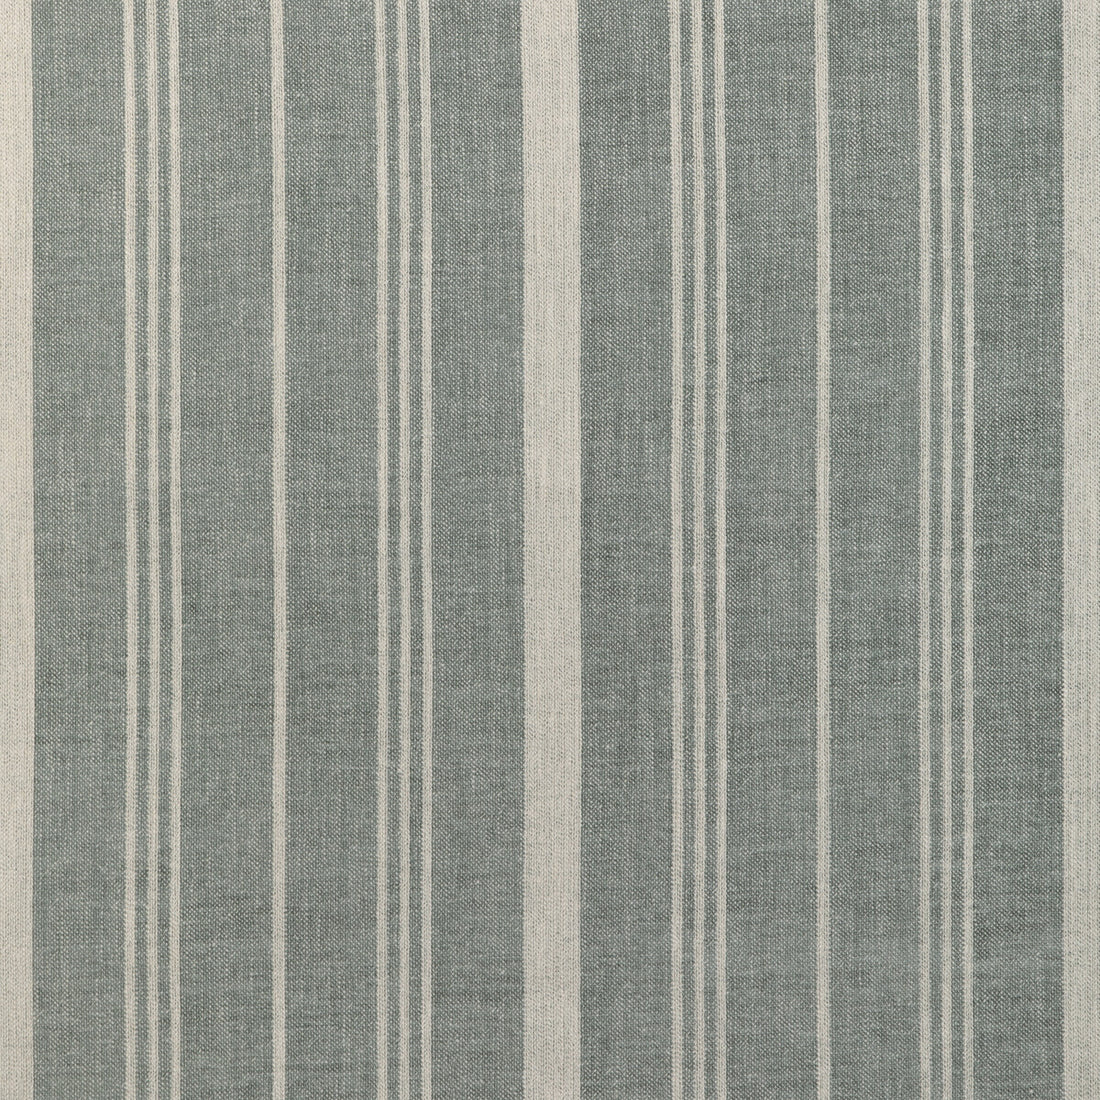 Furrow Stripe fabric in seaglass color - pattern 36902.35.0 - by Kravet Couture in the Atelier Weaves collection